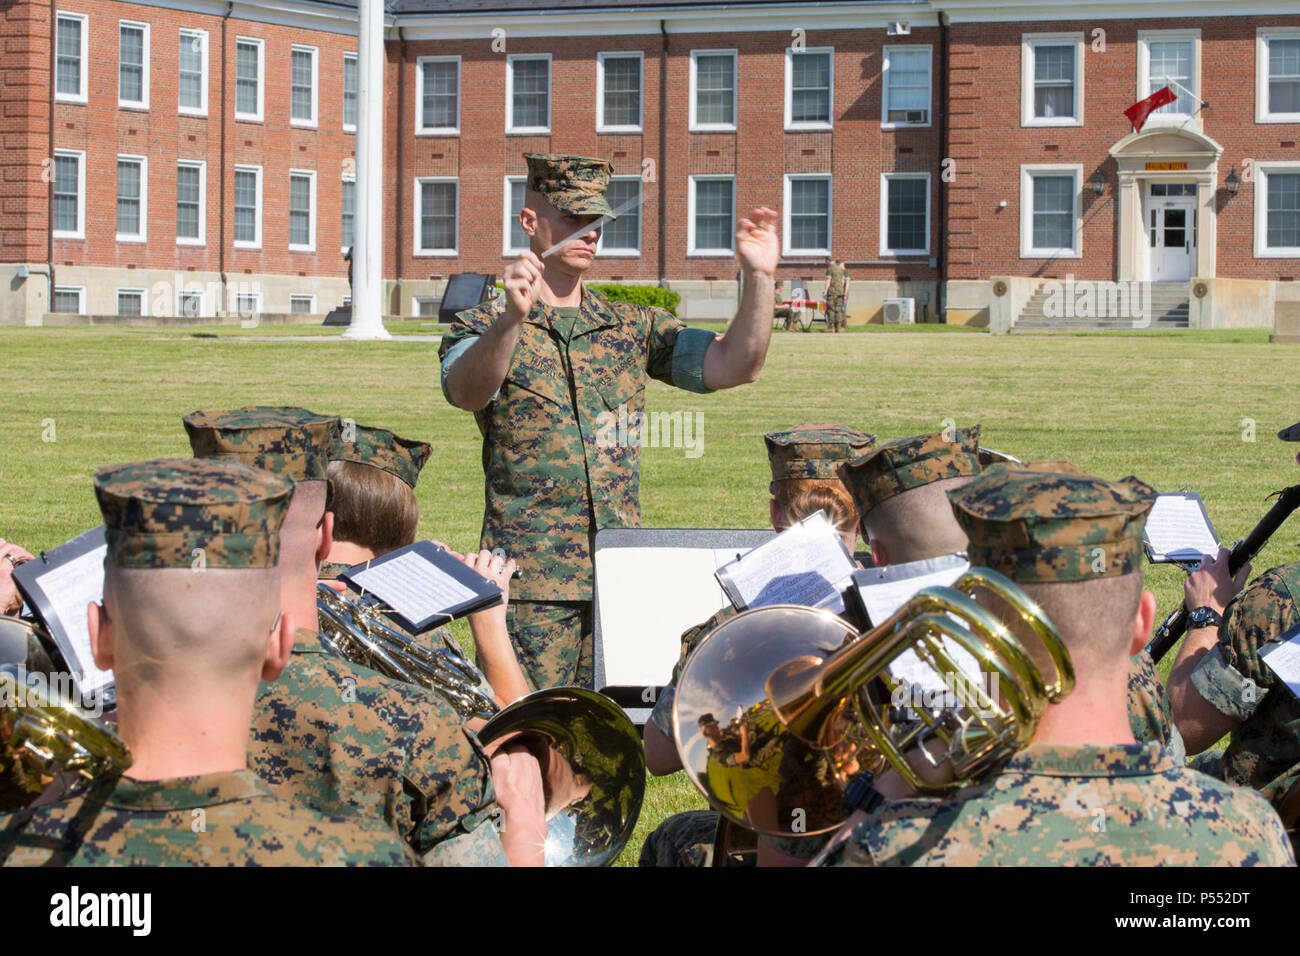 U.S. Marine Corps Gunnery Sgt. Kristofer P. Hutsell, center, enlisted conductor, Headquarters & Service Battalion, conducts the U.S. Marine Corps Quantico band during the Centennial Celebration Ceremony at Lejeune Field, Marine Corps Base (MCB) Quantico, Va., May 10, 2017. The event commemorates the founding of MCB Quantico in 1917, and consisted of performances by the U.S. Marine Corps Silent Drill Platoon and the U.S. Marine Drum & Bugle Corps. Stock Photo